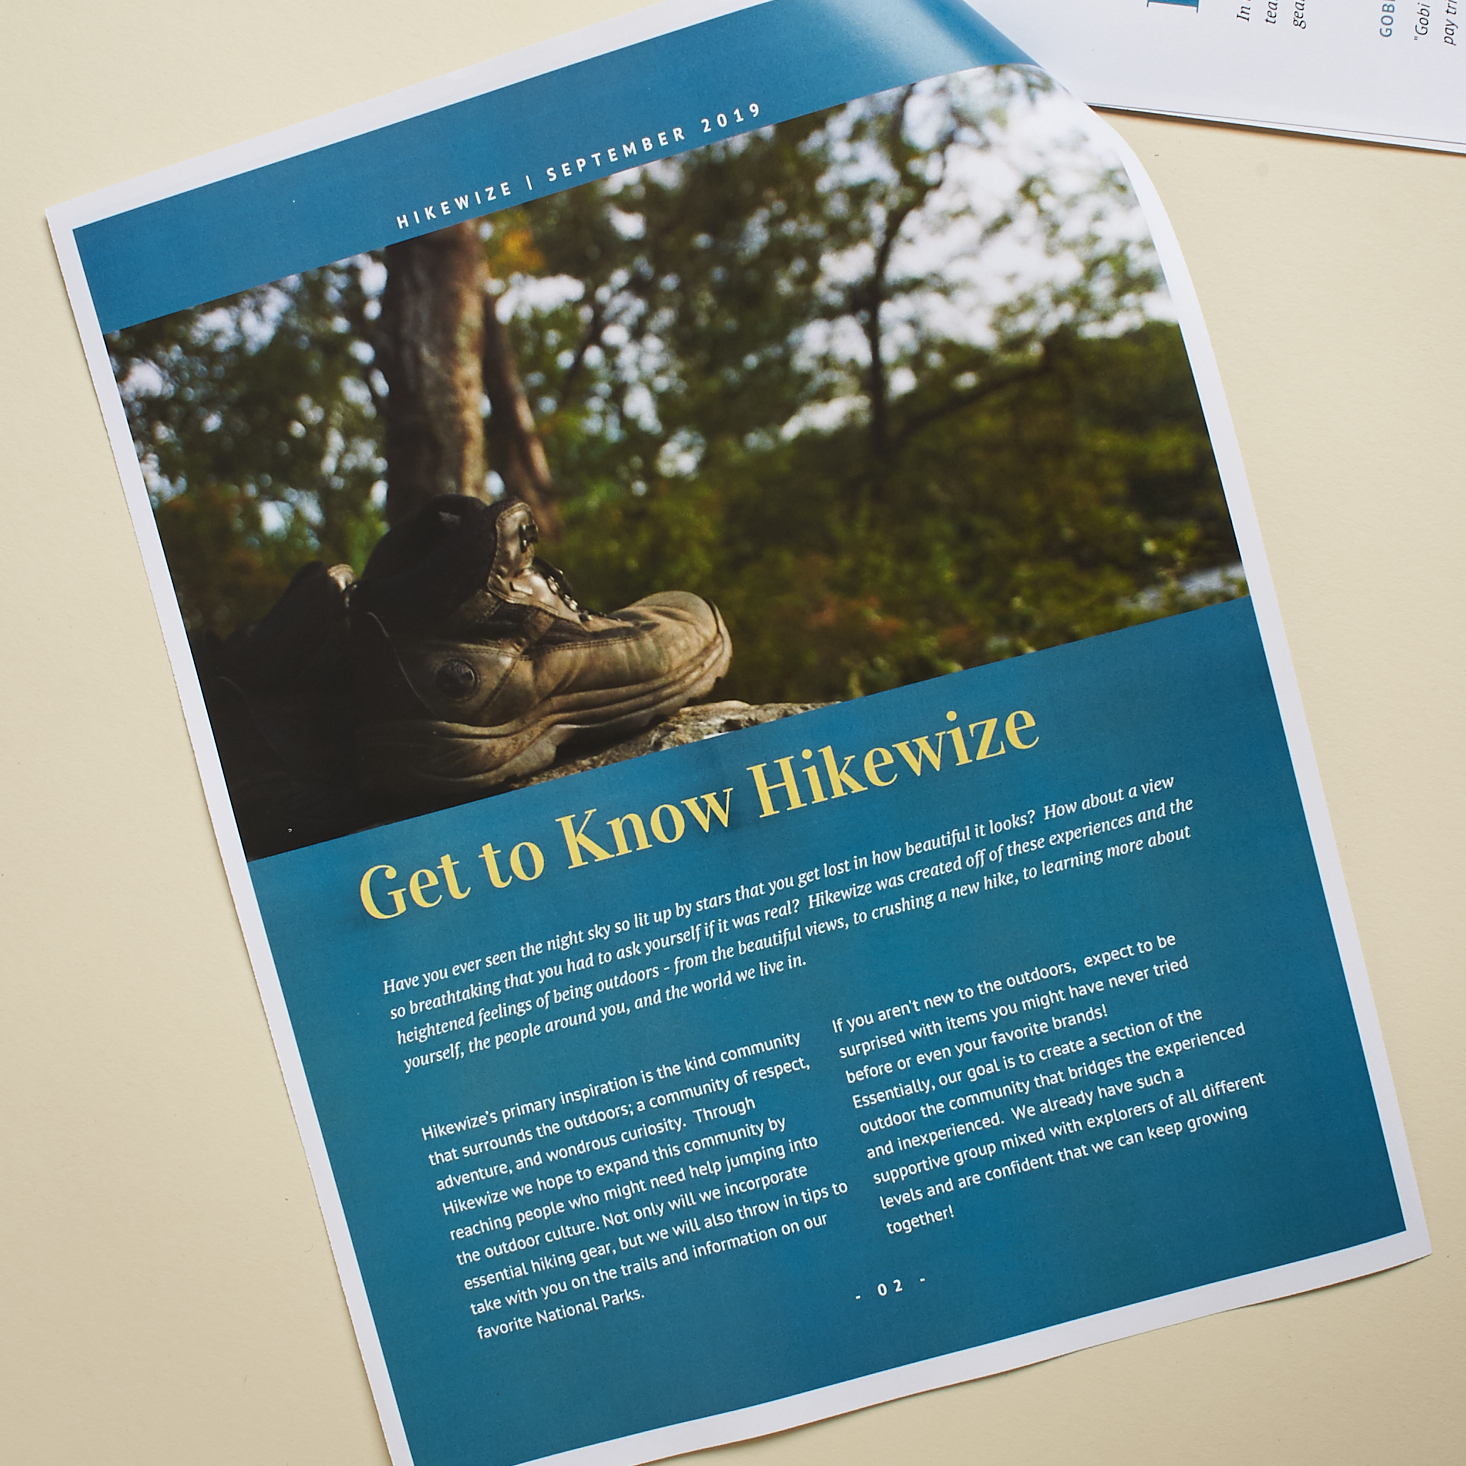 1st page of Hikewize info booklet with intro